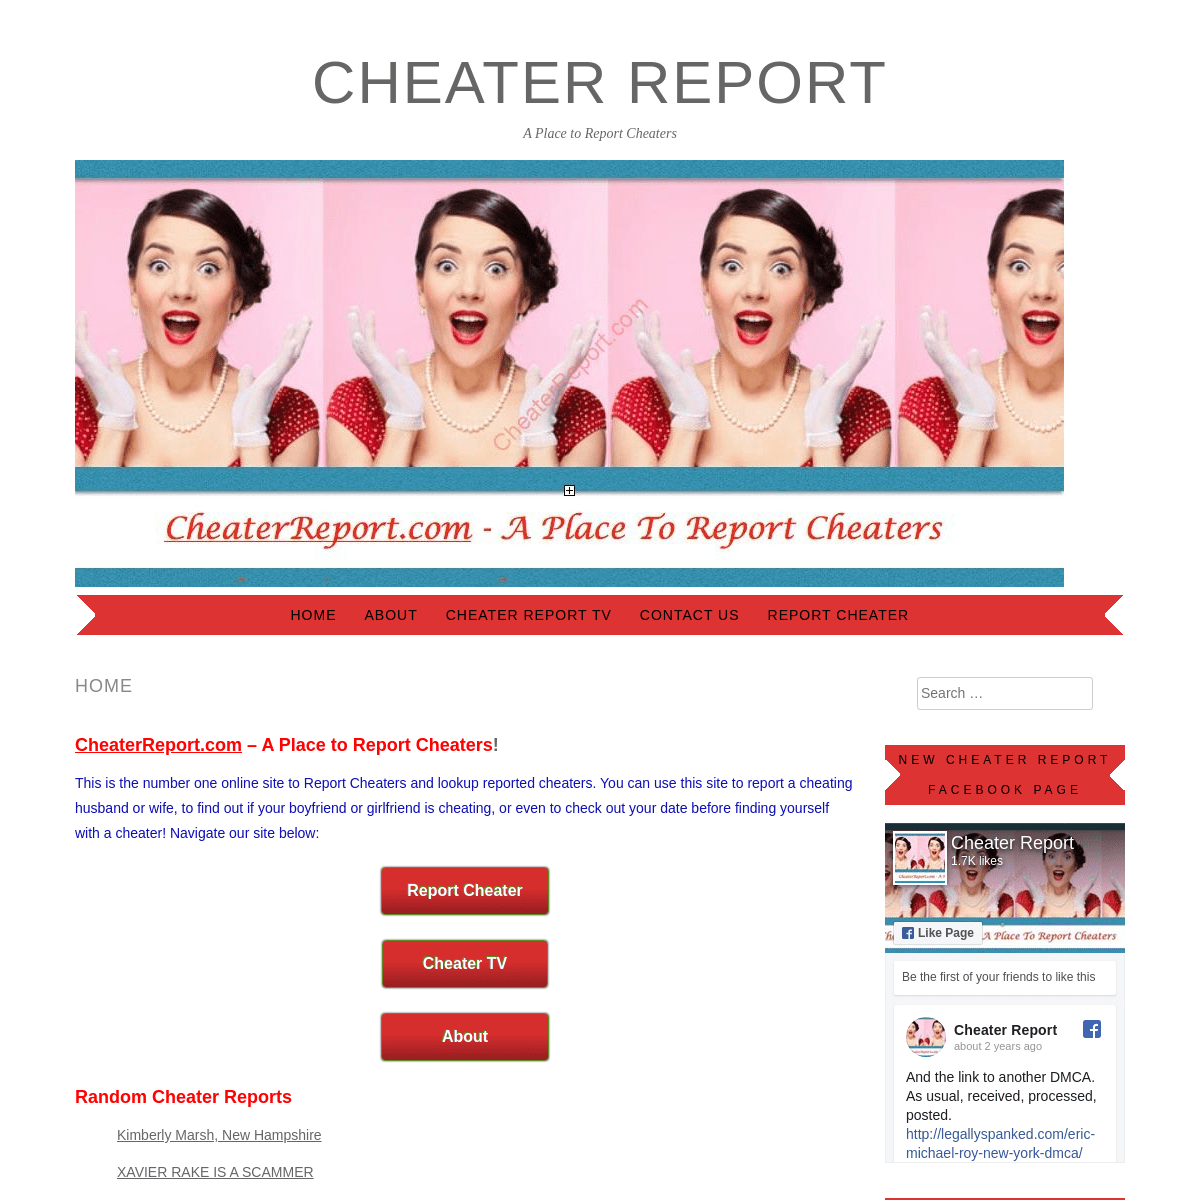 A complete backup of cheaterreport.com